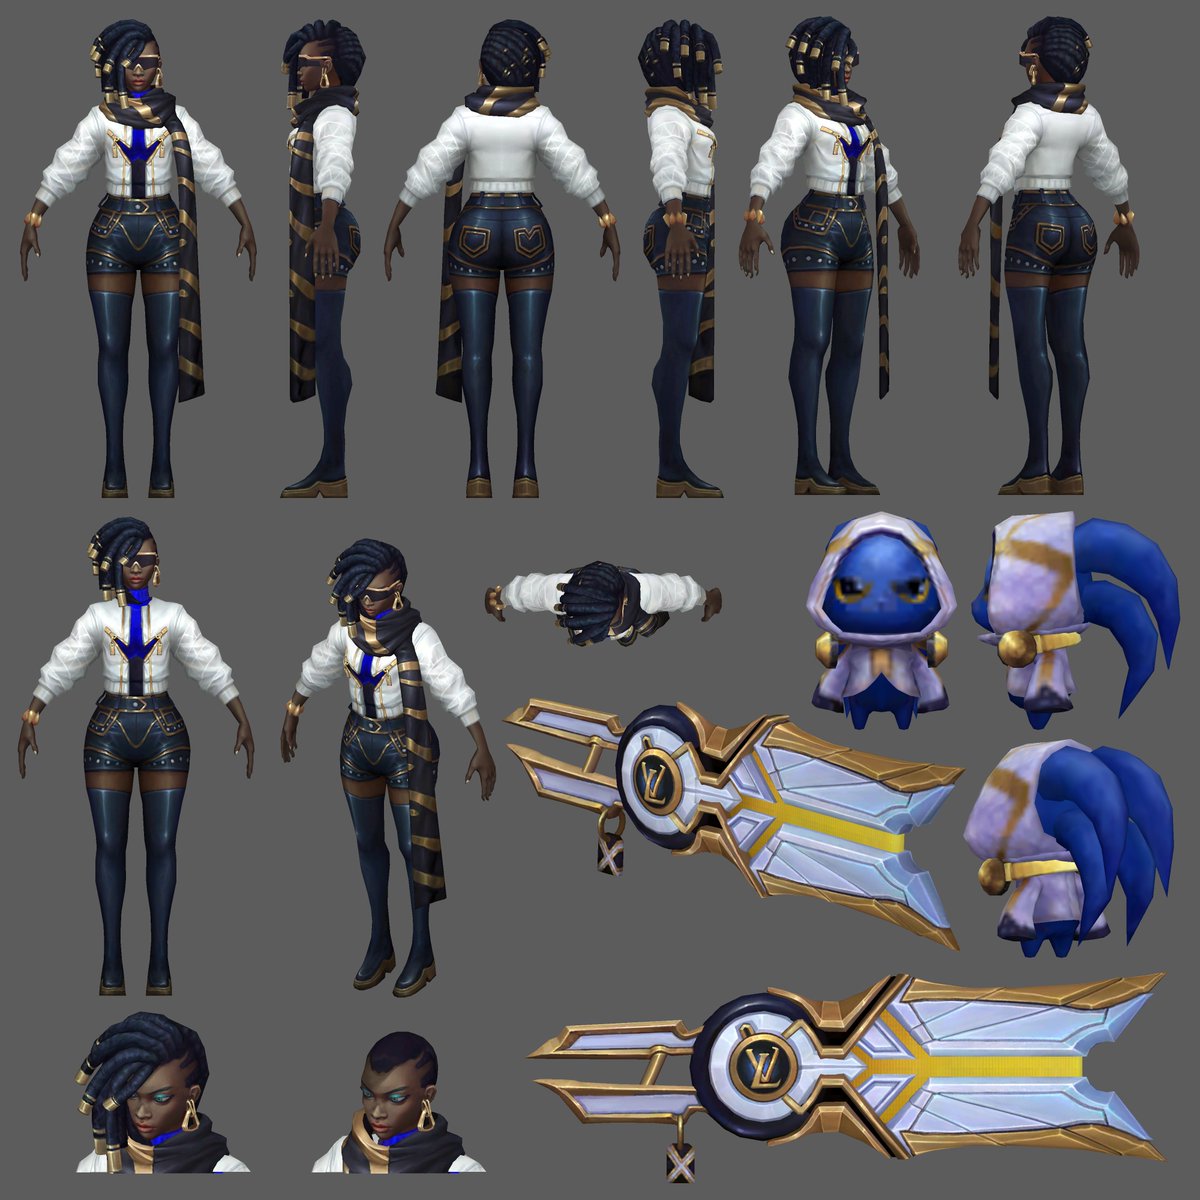 Ref sheets of PBE Patch 10.3 including Heartseeker Yuumi 💗 Heartseeker Jinx 💕 and Prestige True Damage Senna✨ Chromas will be posted in this Thread later or on tumblr o/